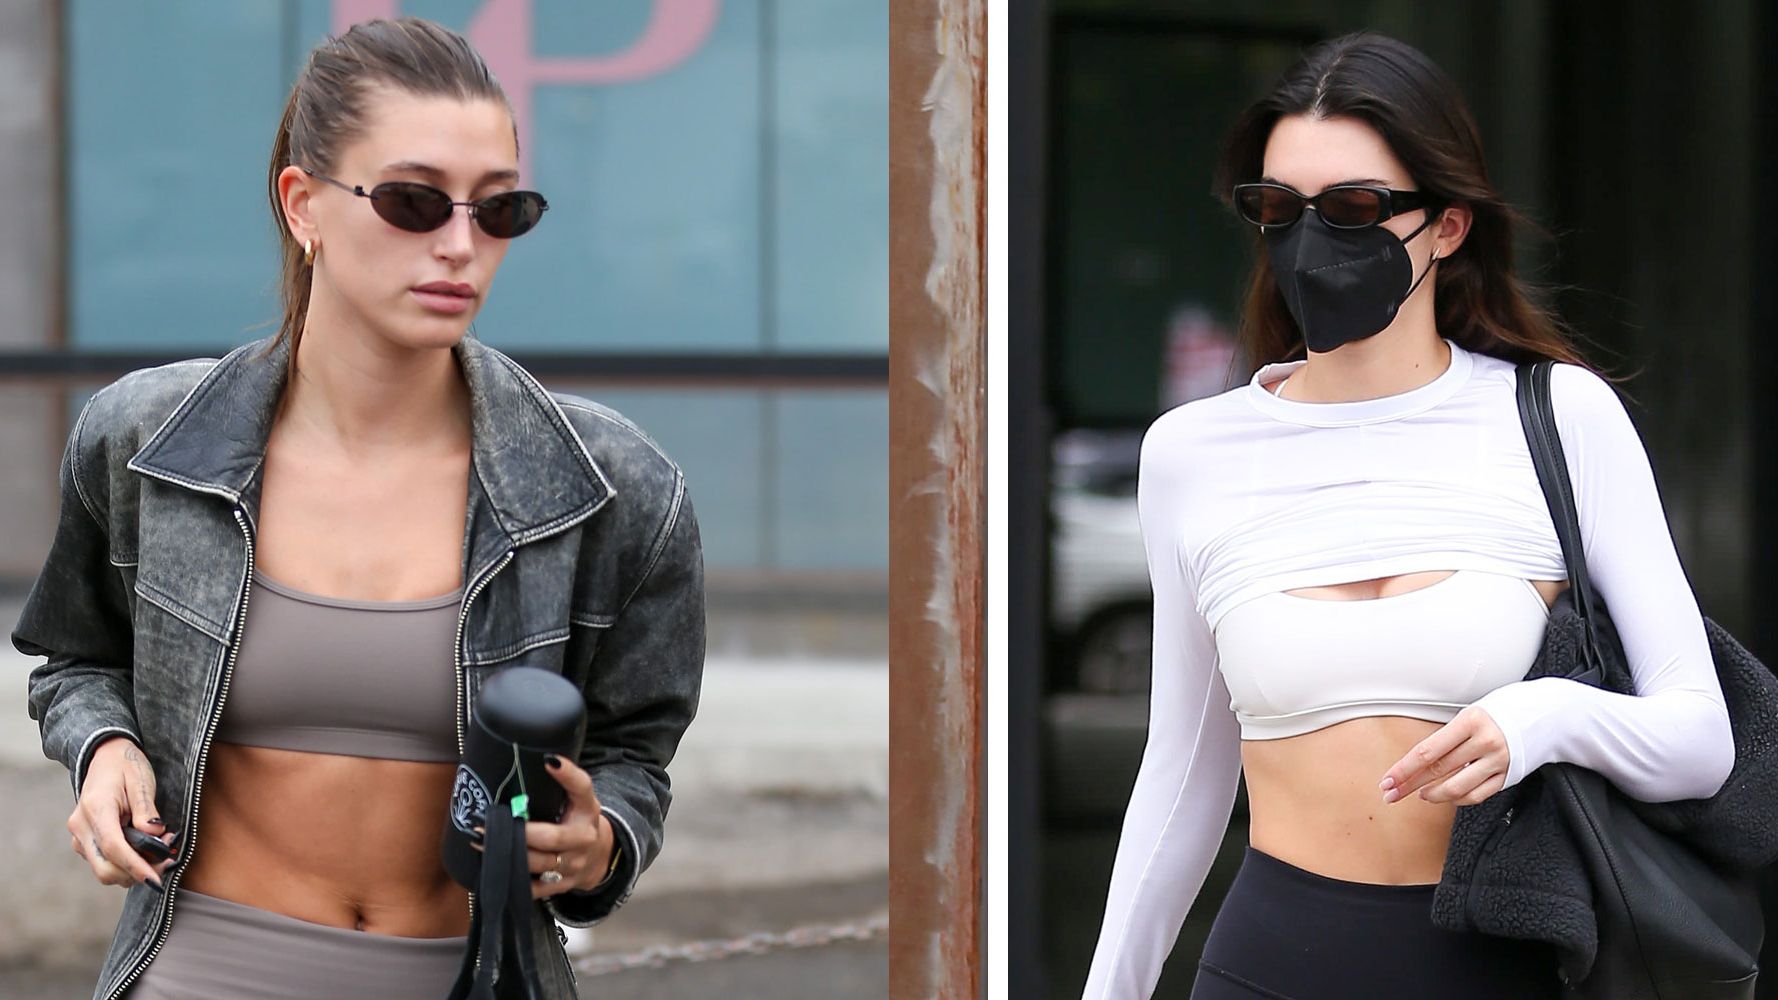 Hailey Bieber and Kendall Jenner enjoy a private Pilates session